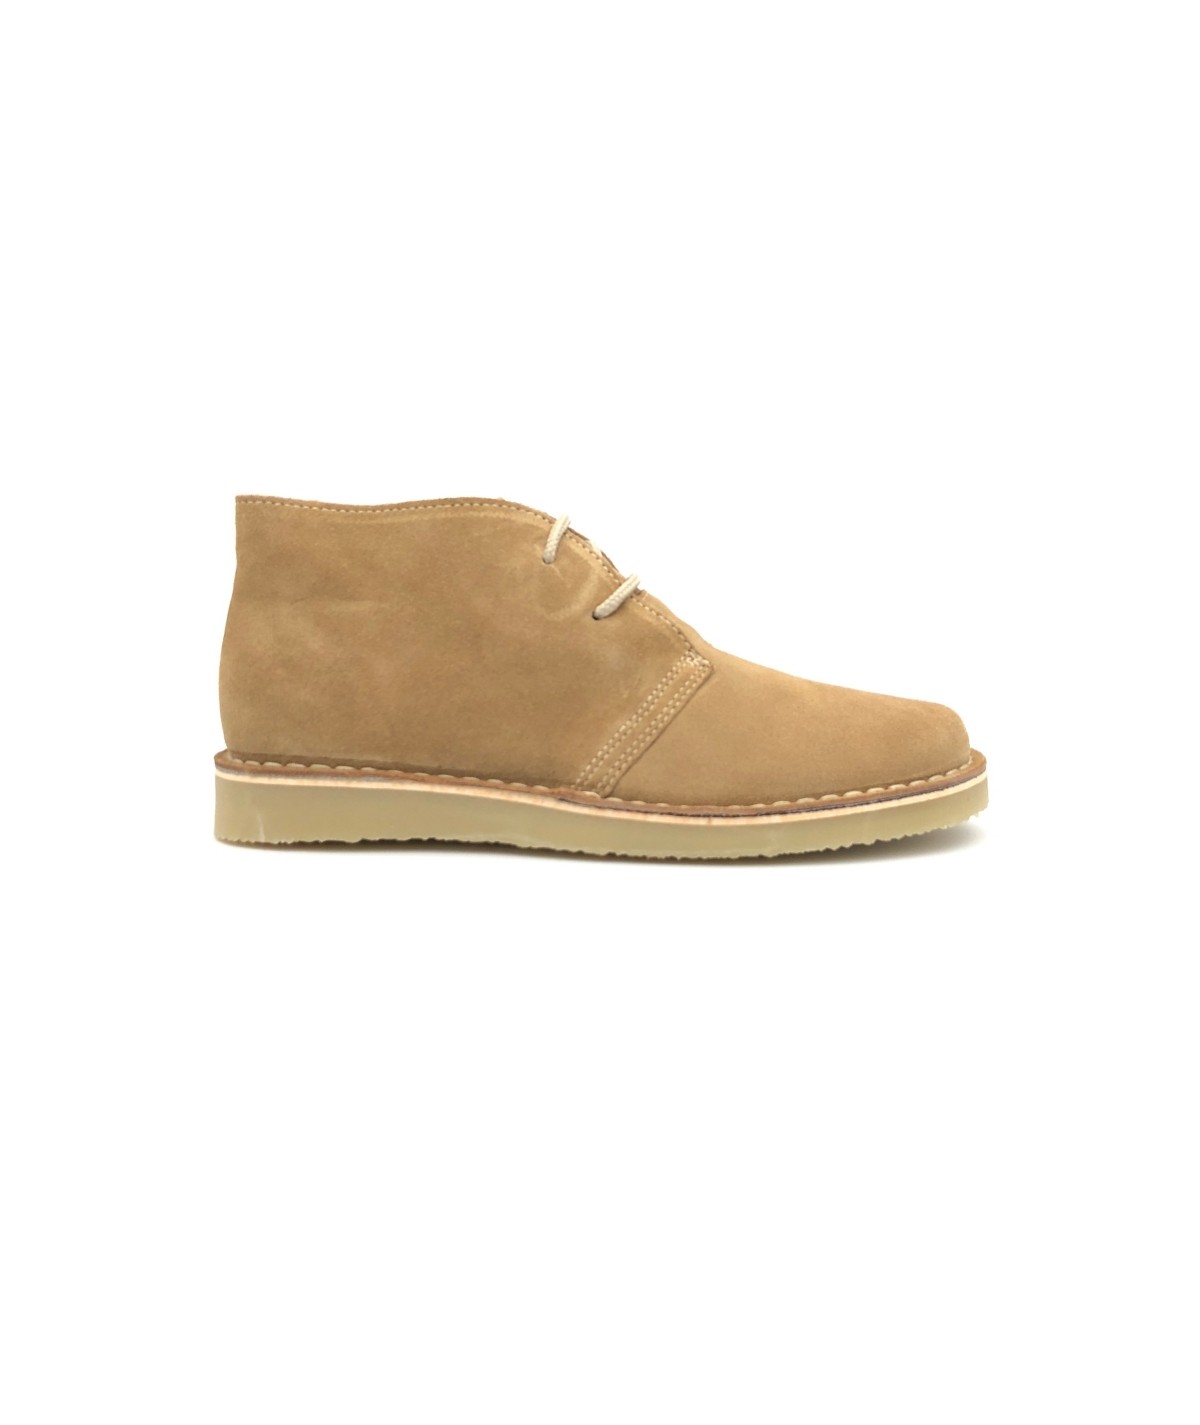 Sand colored Desert boots with Dover sole for men